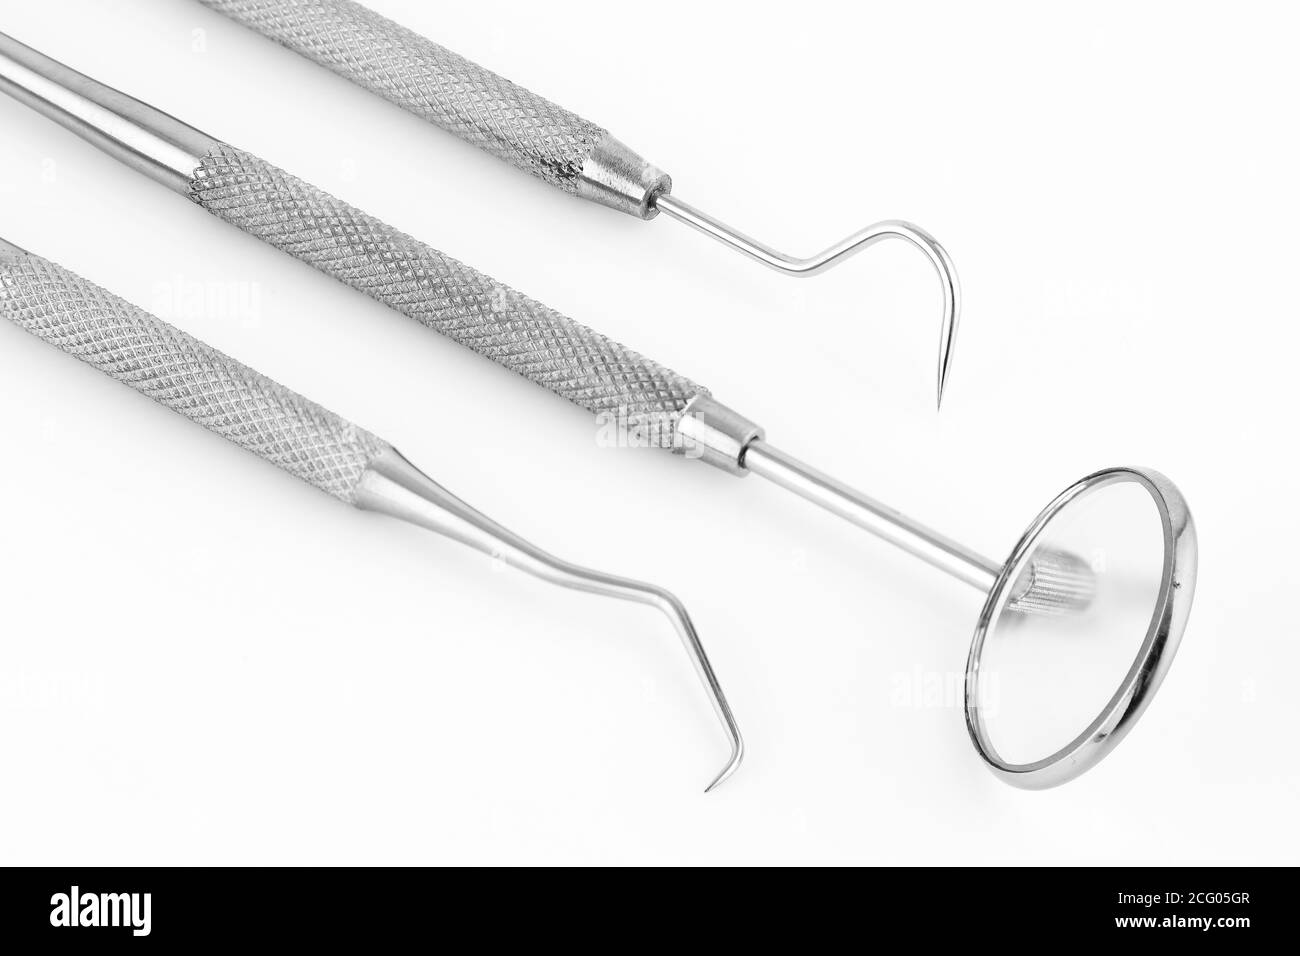 Dentist's tools inclined on a white background Stock Photo